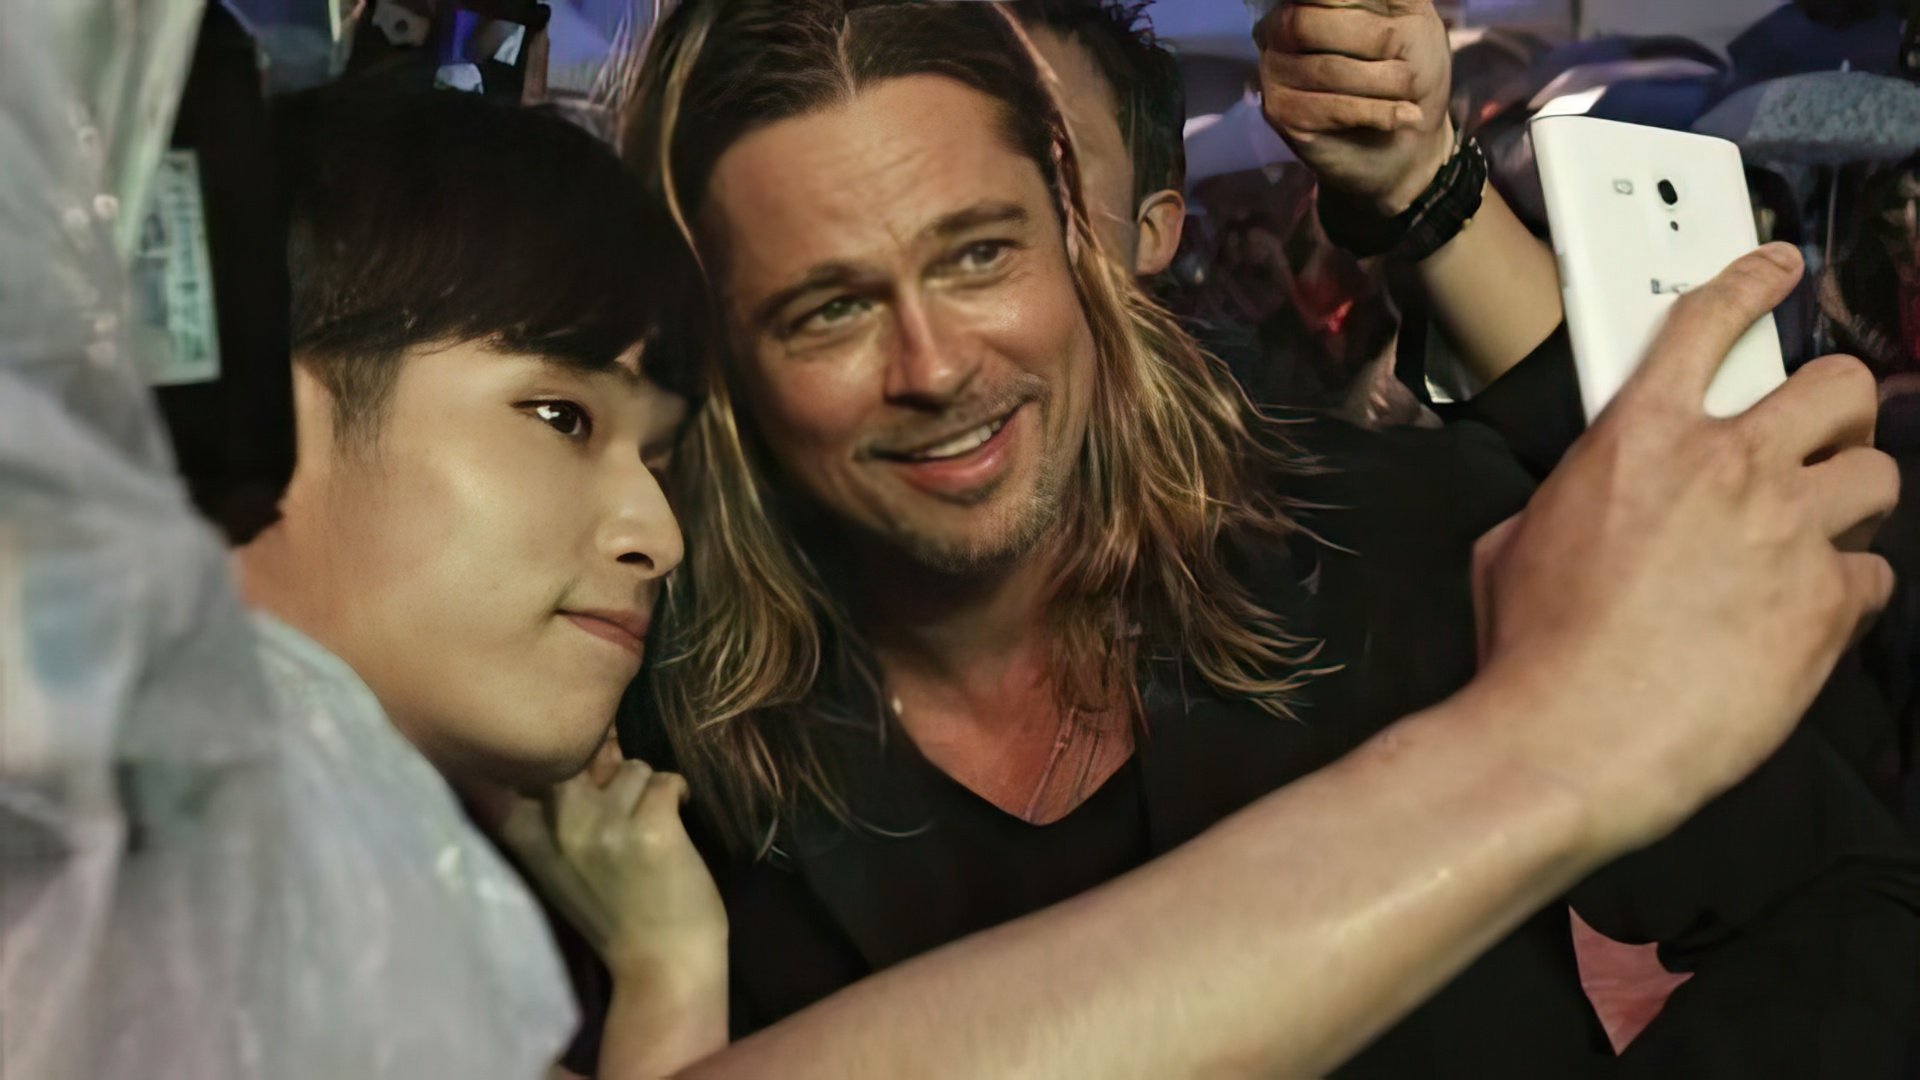 Long-haired Brad Pitt with his fans